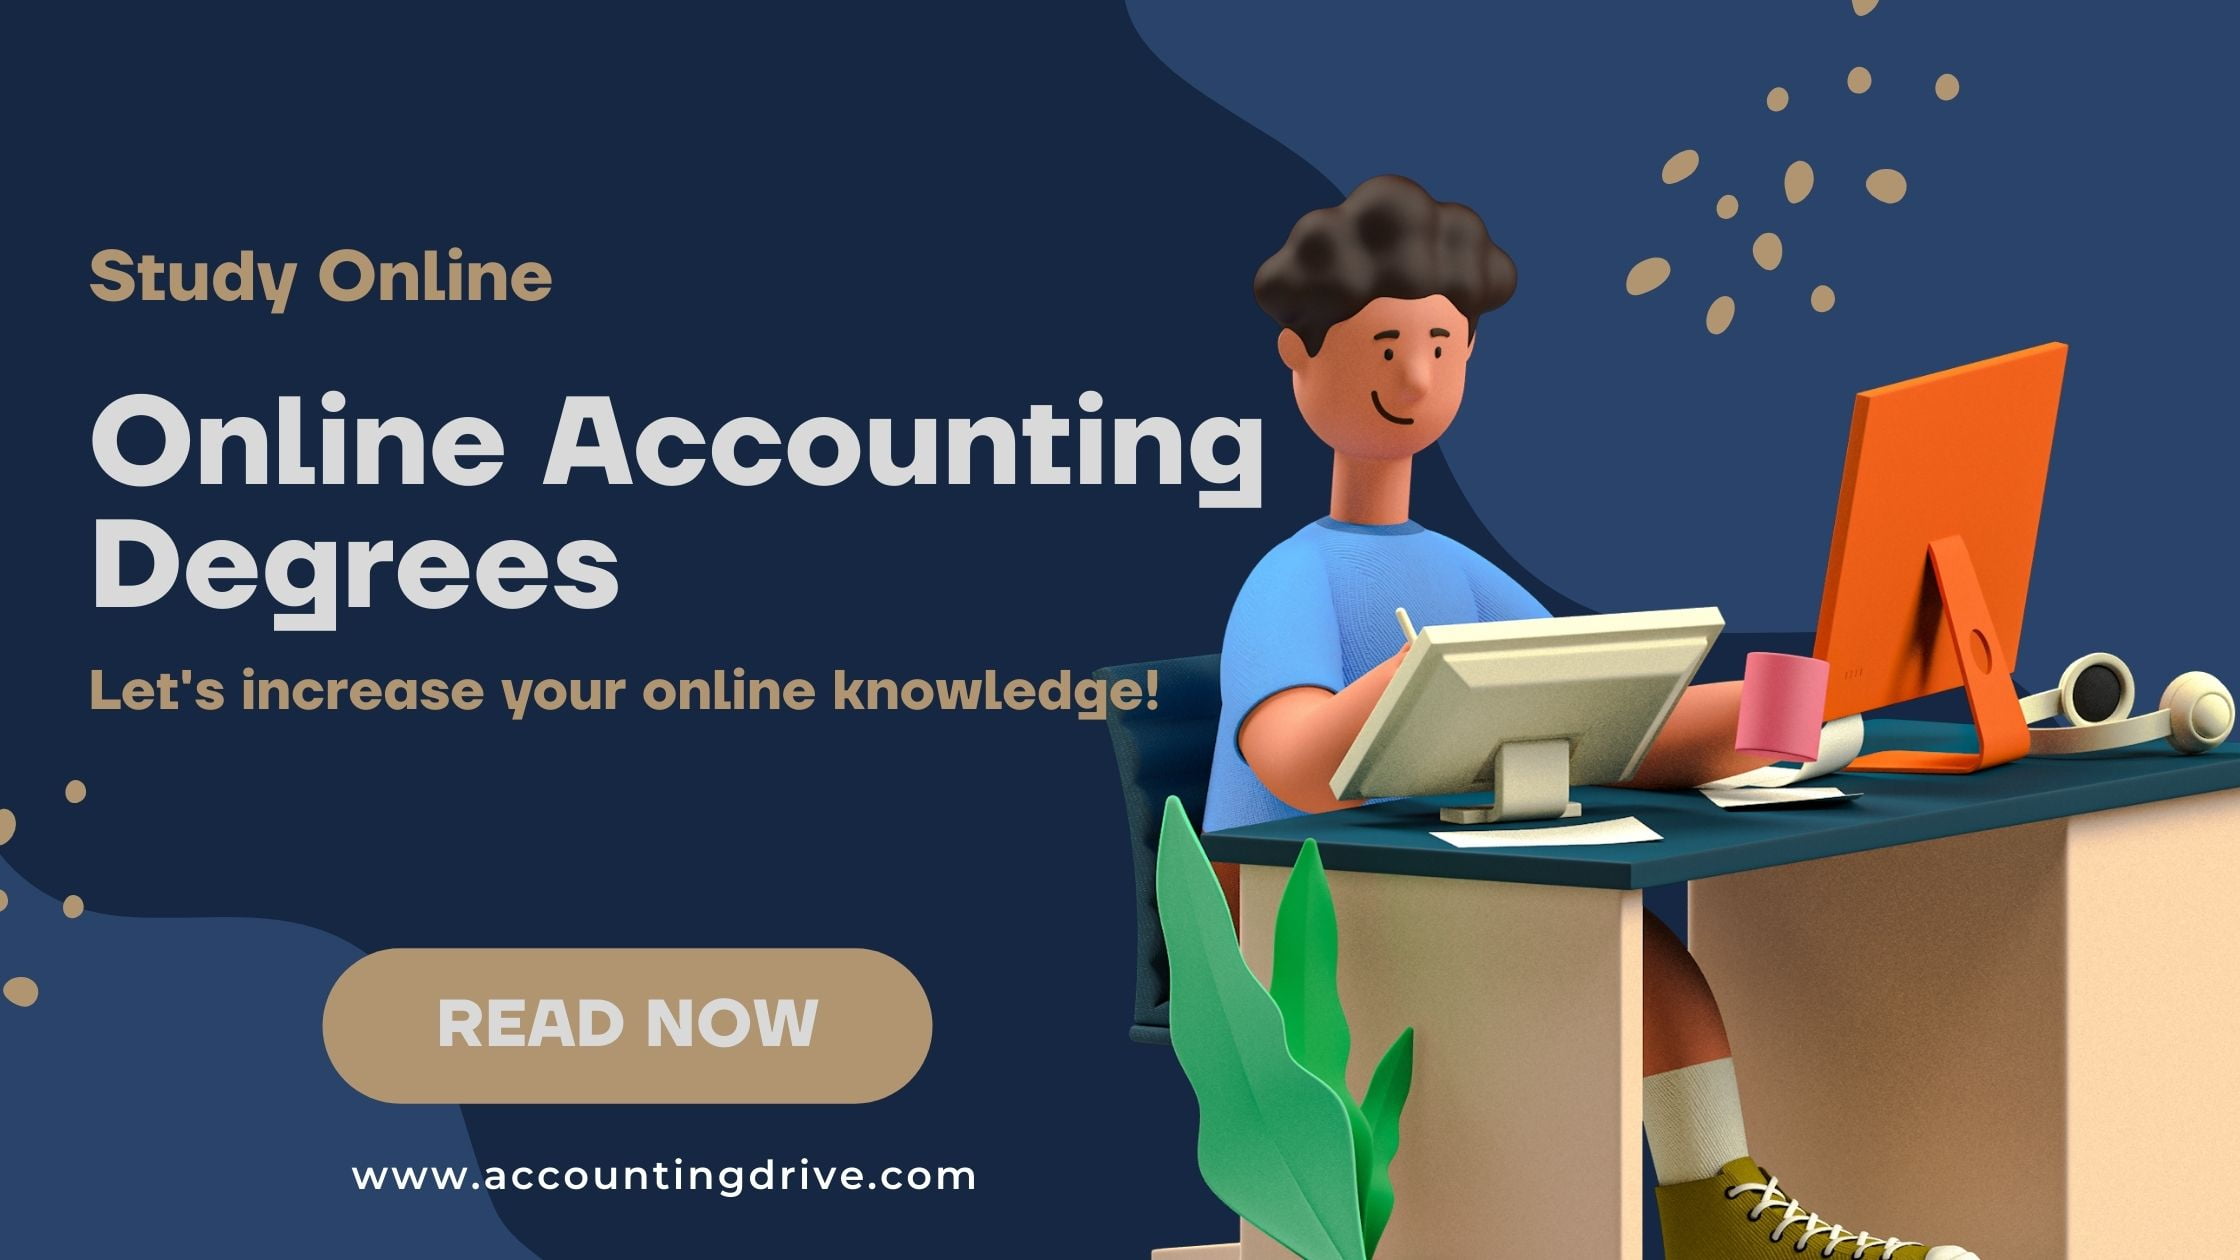 Online accounting degrees